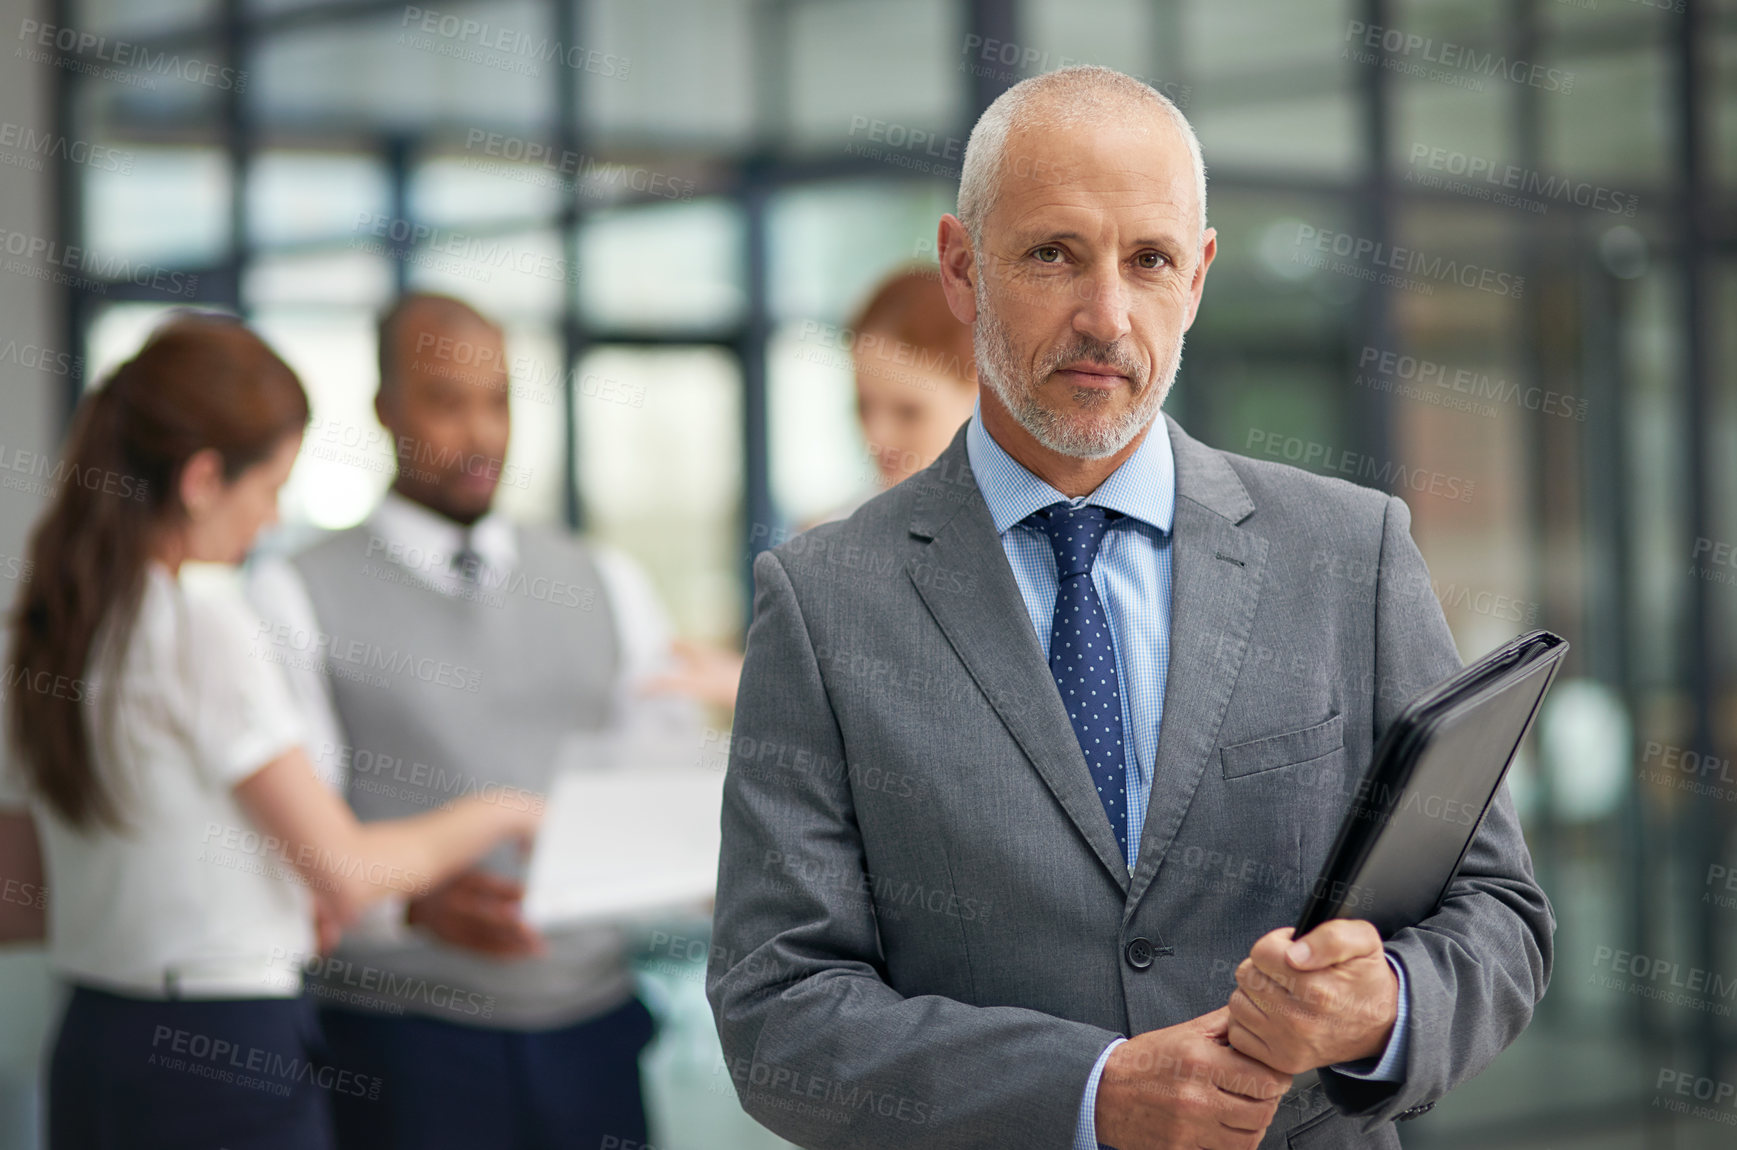 Buy stock photo Portrait of a mature businessman standing in the office with his colleagues in the background